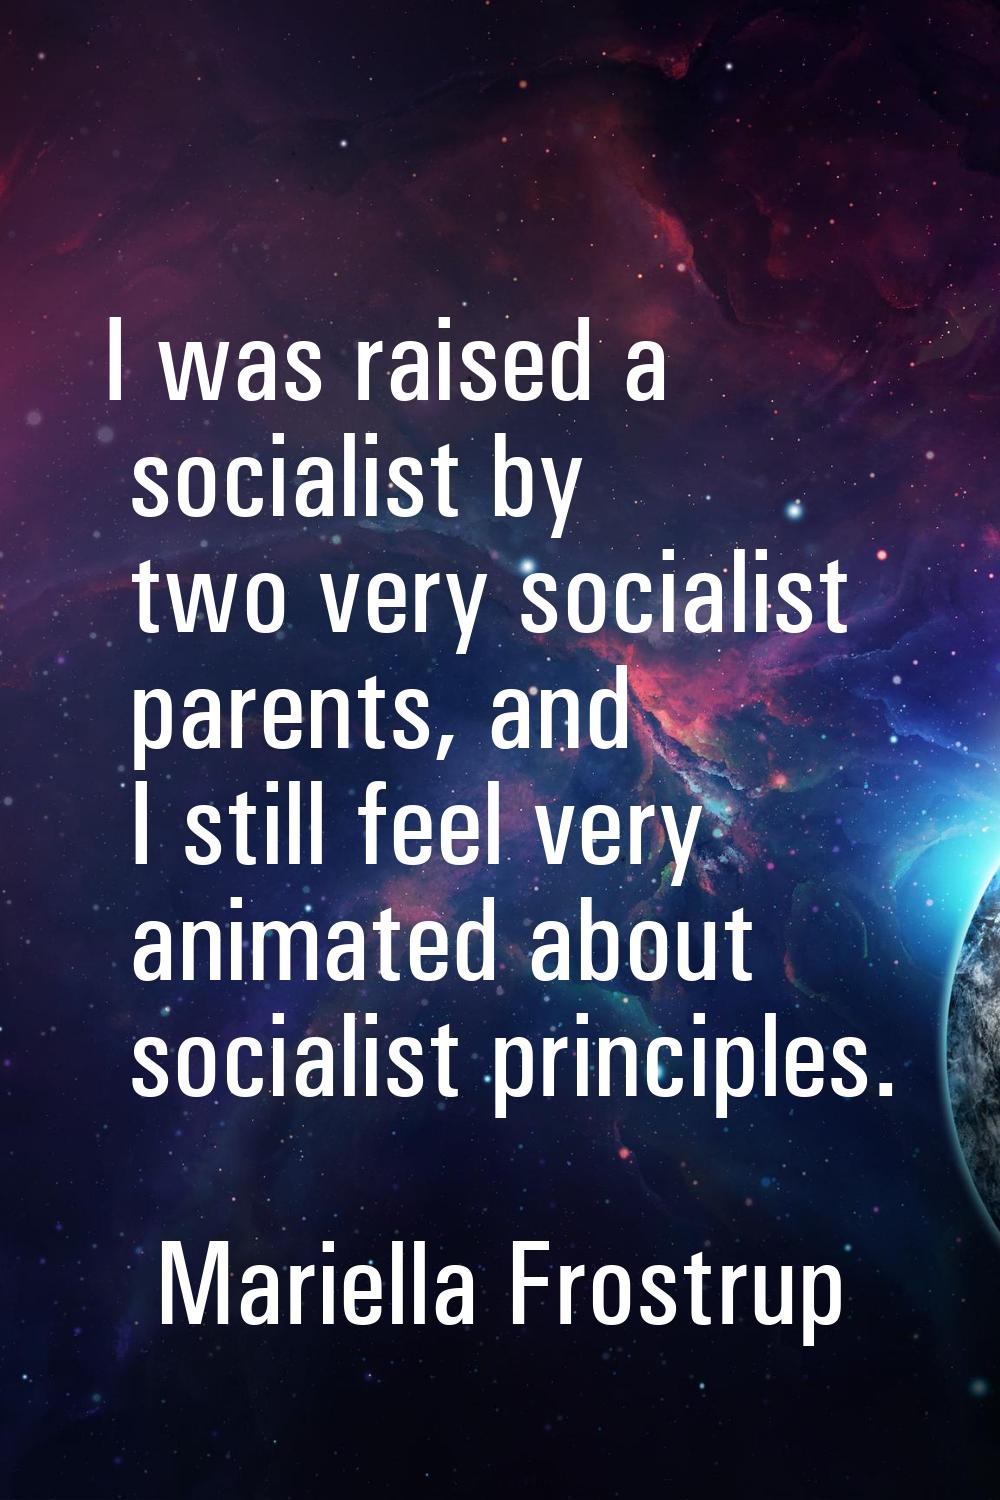 I was raised a socialist by two very socialist parents, and I still feel very animated about social